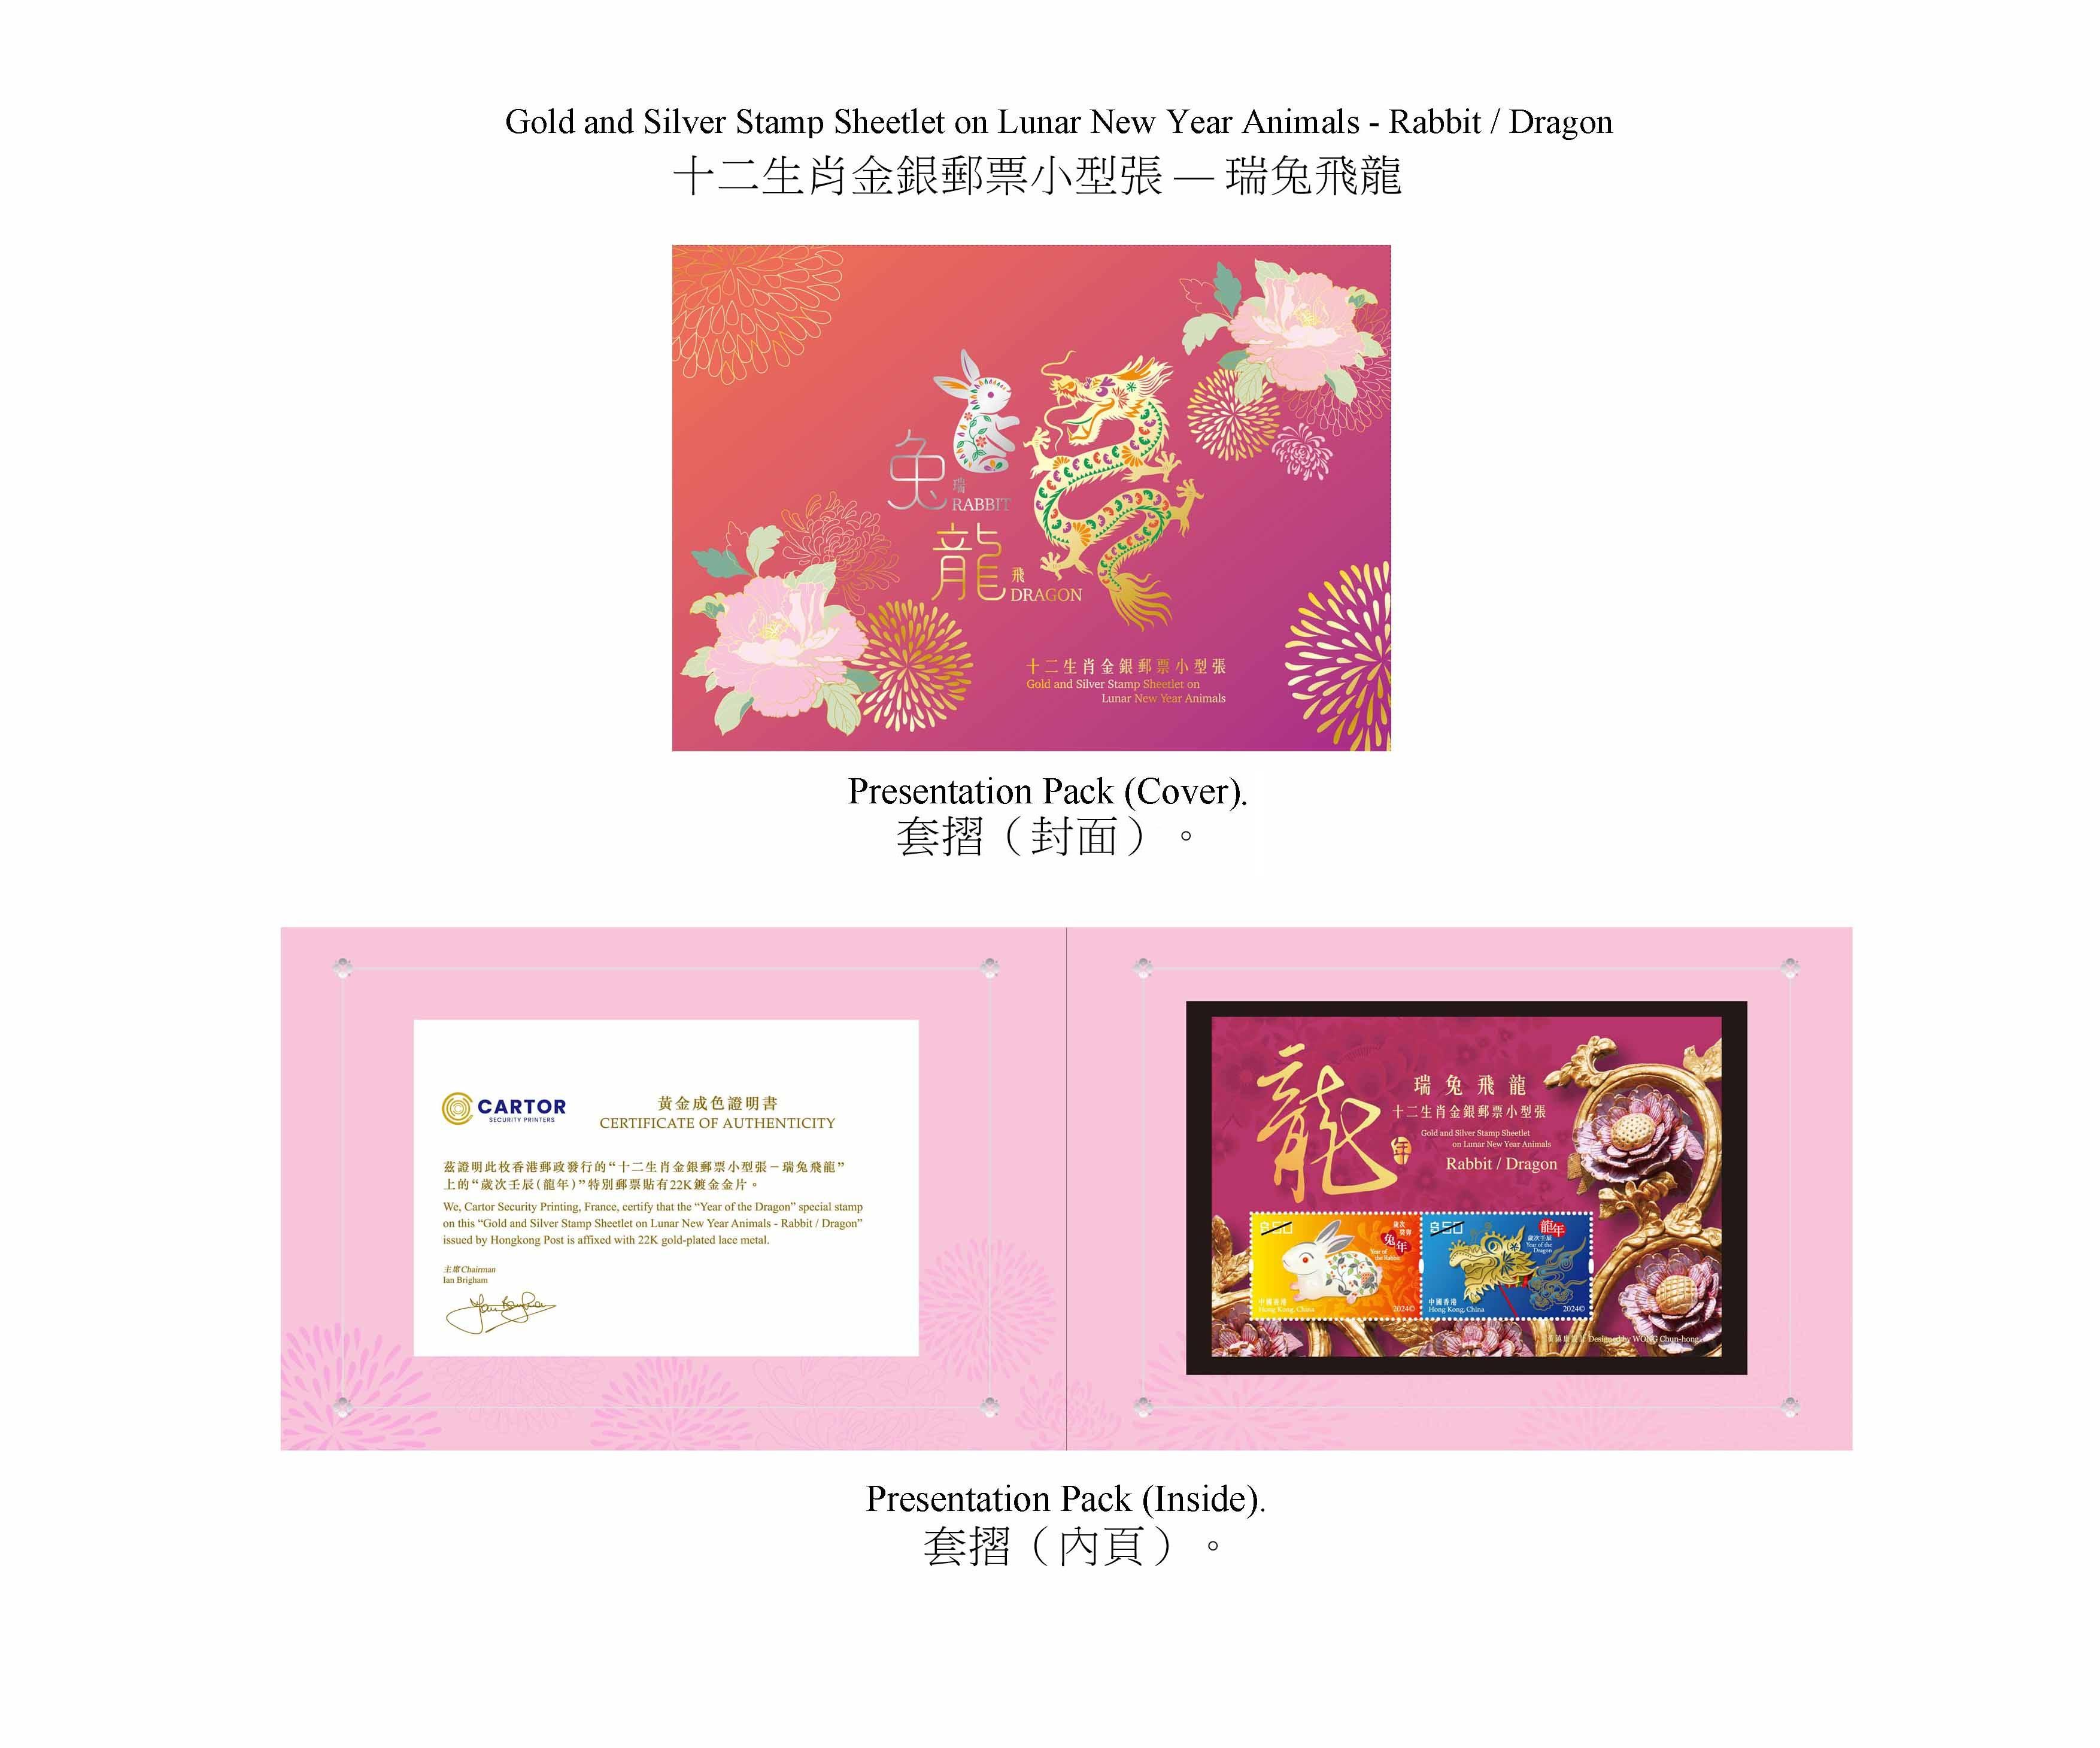 Hongkong Post will launch a special stamp issue and associated philatelic products on the theme of "Year of the Dragon" on January 5, 2024 (Friday). The "Gold and Silver Stamp Sheetlet on Lunar New Year Animals - Ribbit/Dragon" will also be launched on the same day. Photos show the presentation pack.
